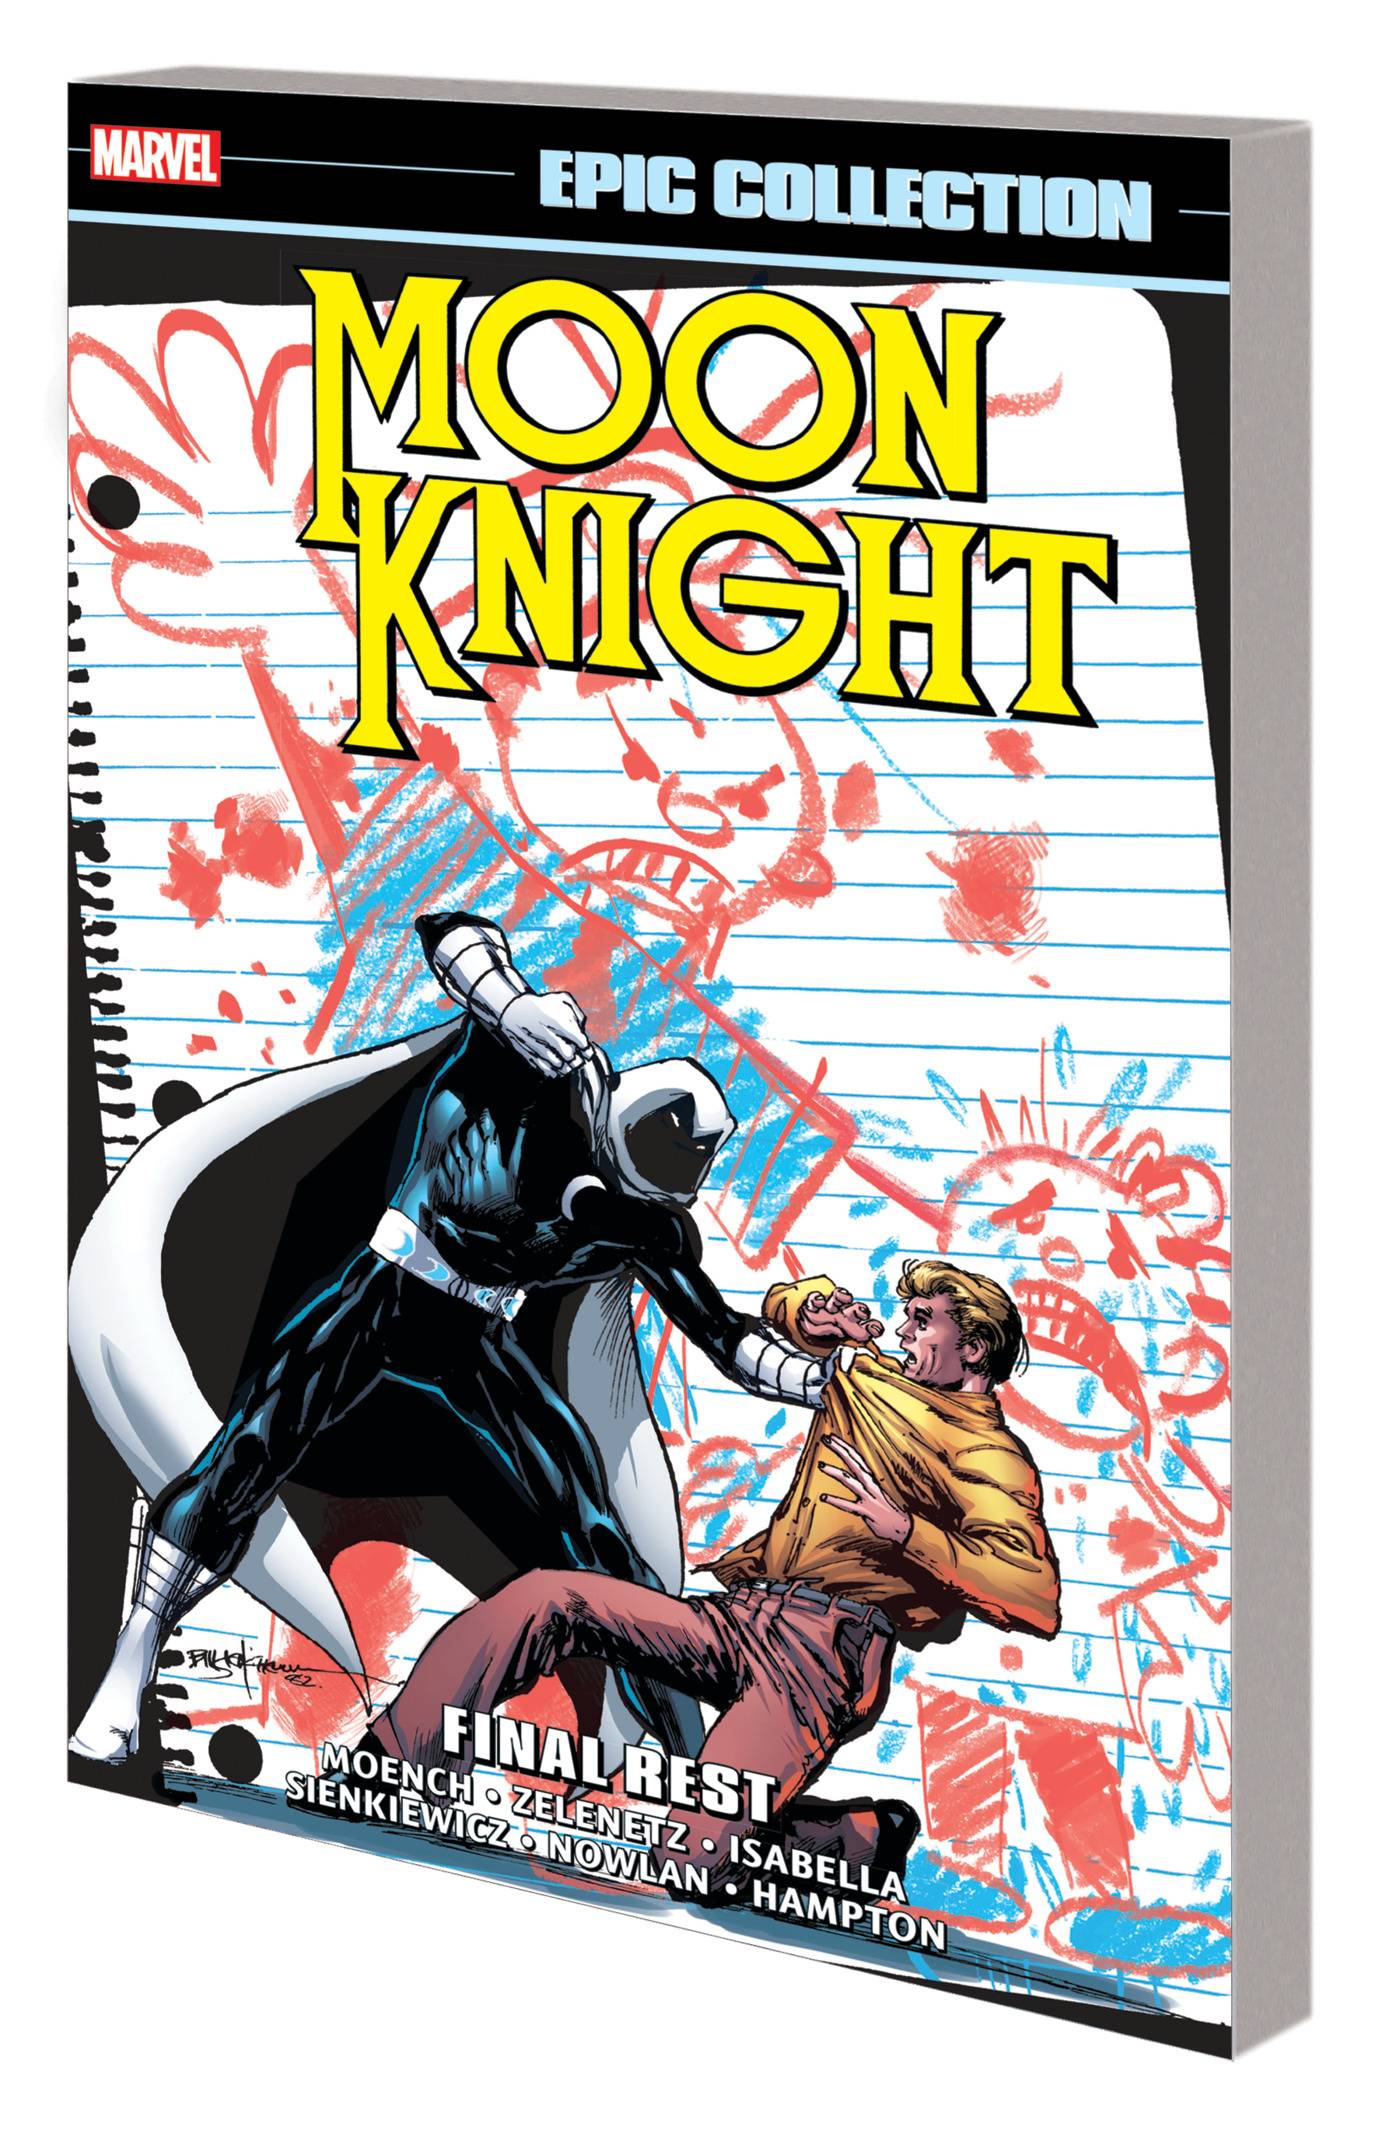 MOON KNIGHT EPIC COLLECTION TP FINAL REST NEW PTG